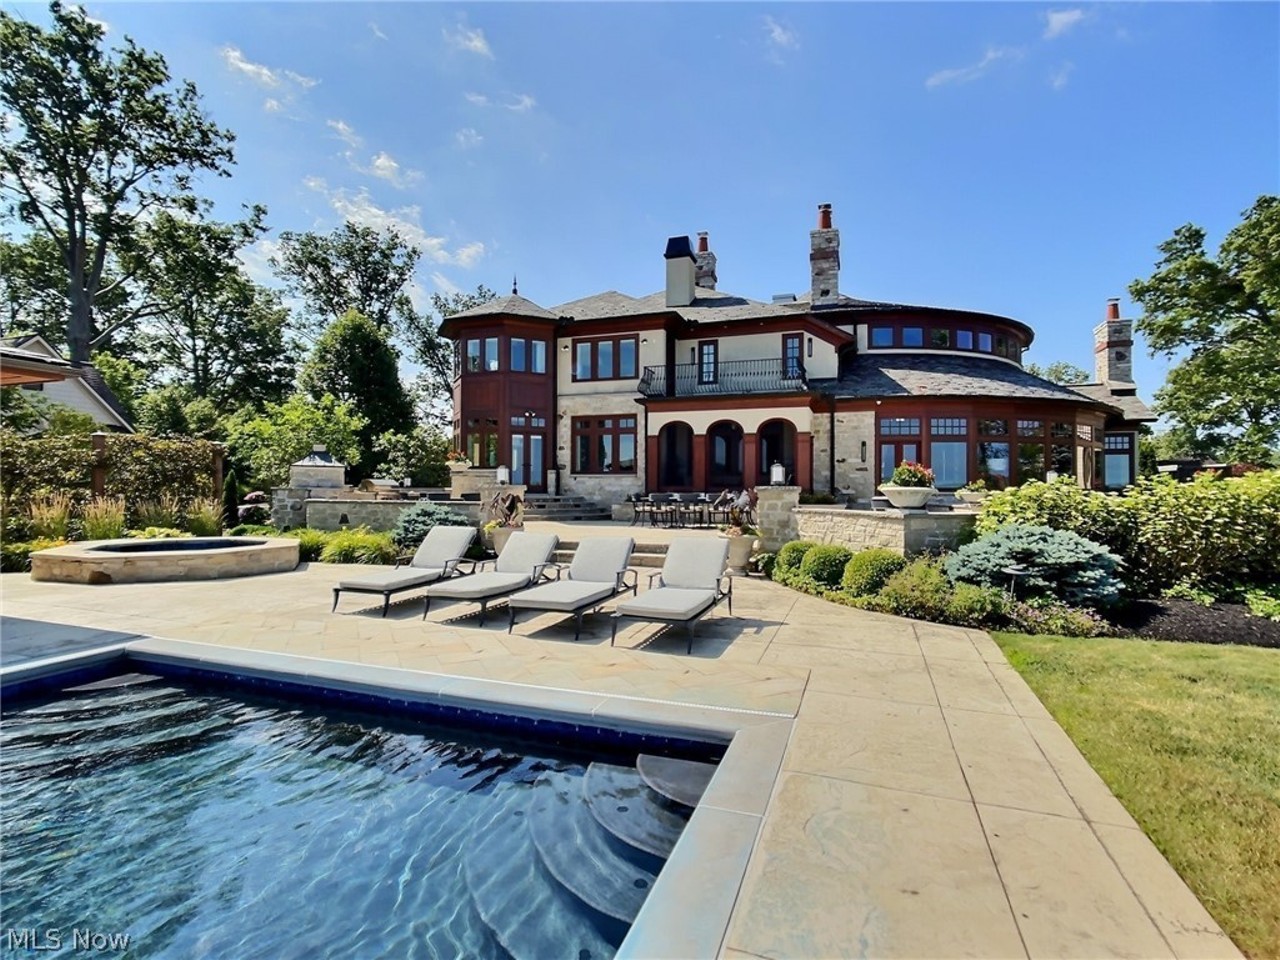 This Avon Lake Mansion Right on the Water Just Hit the Market for $5.5 Million